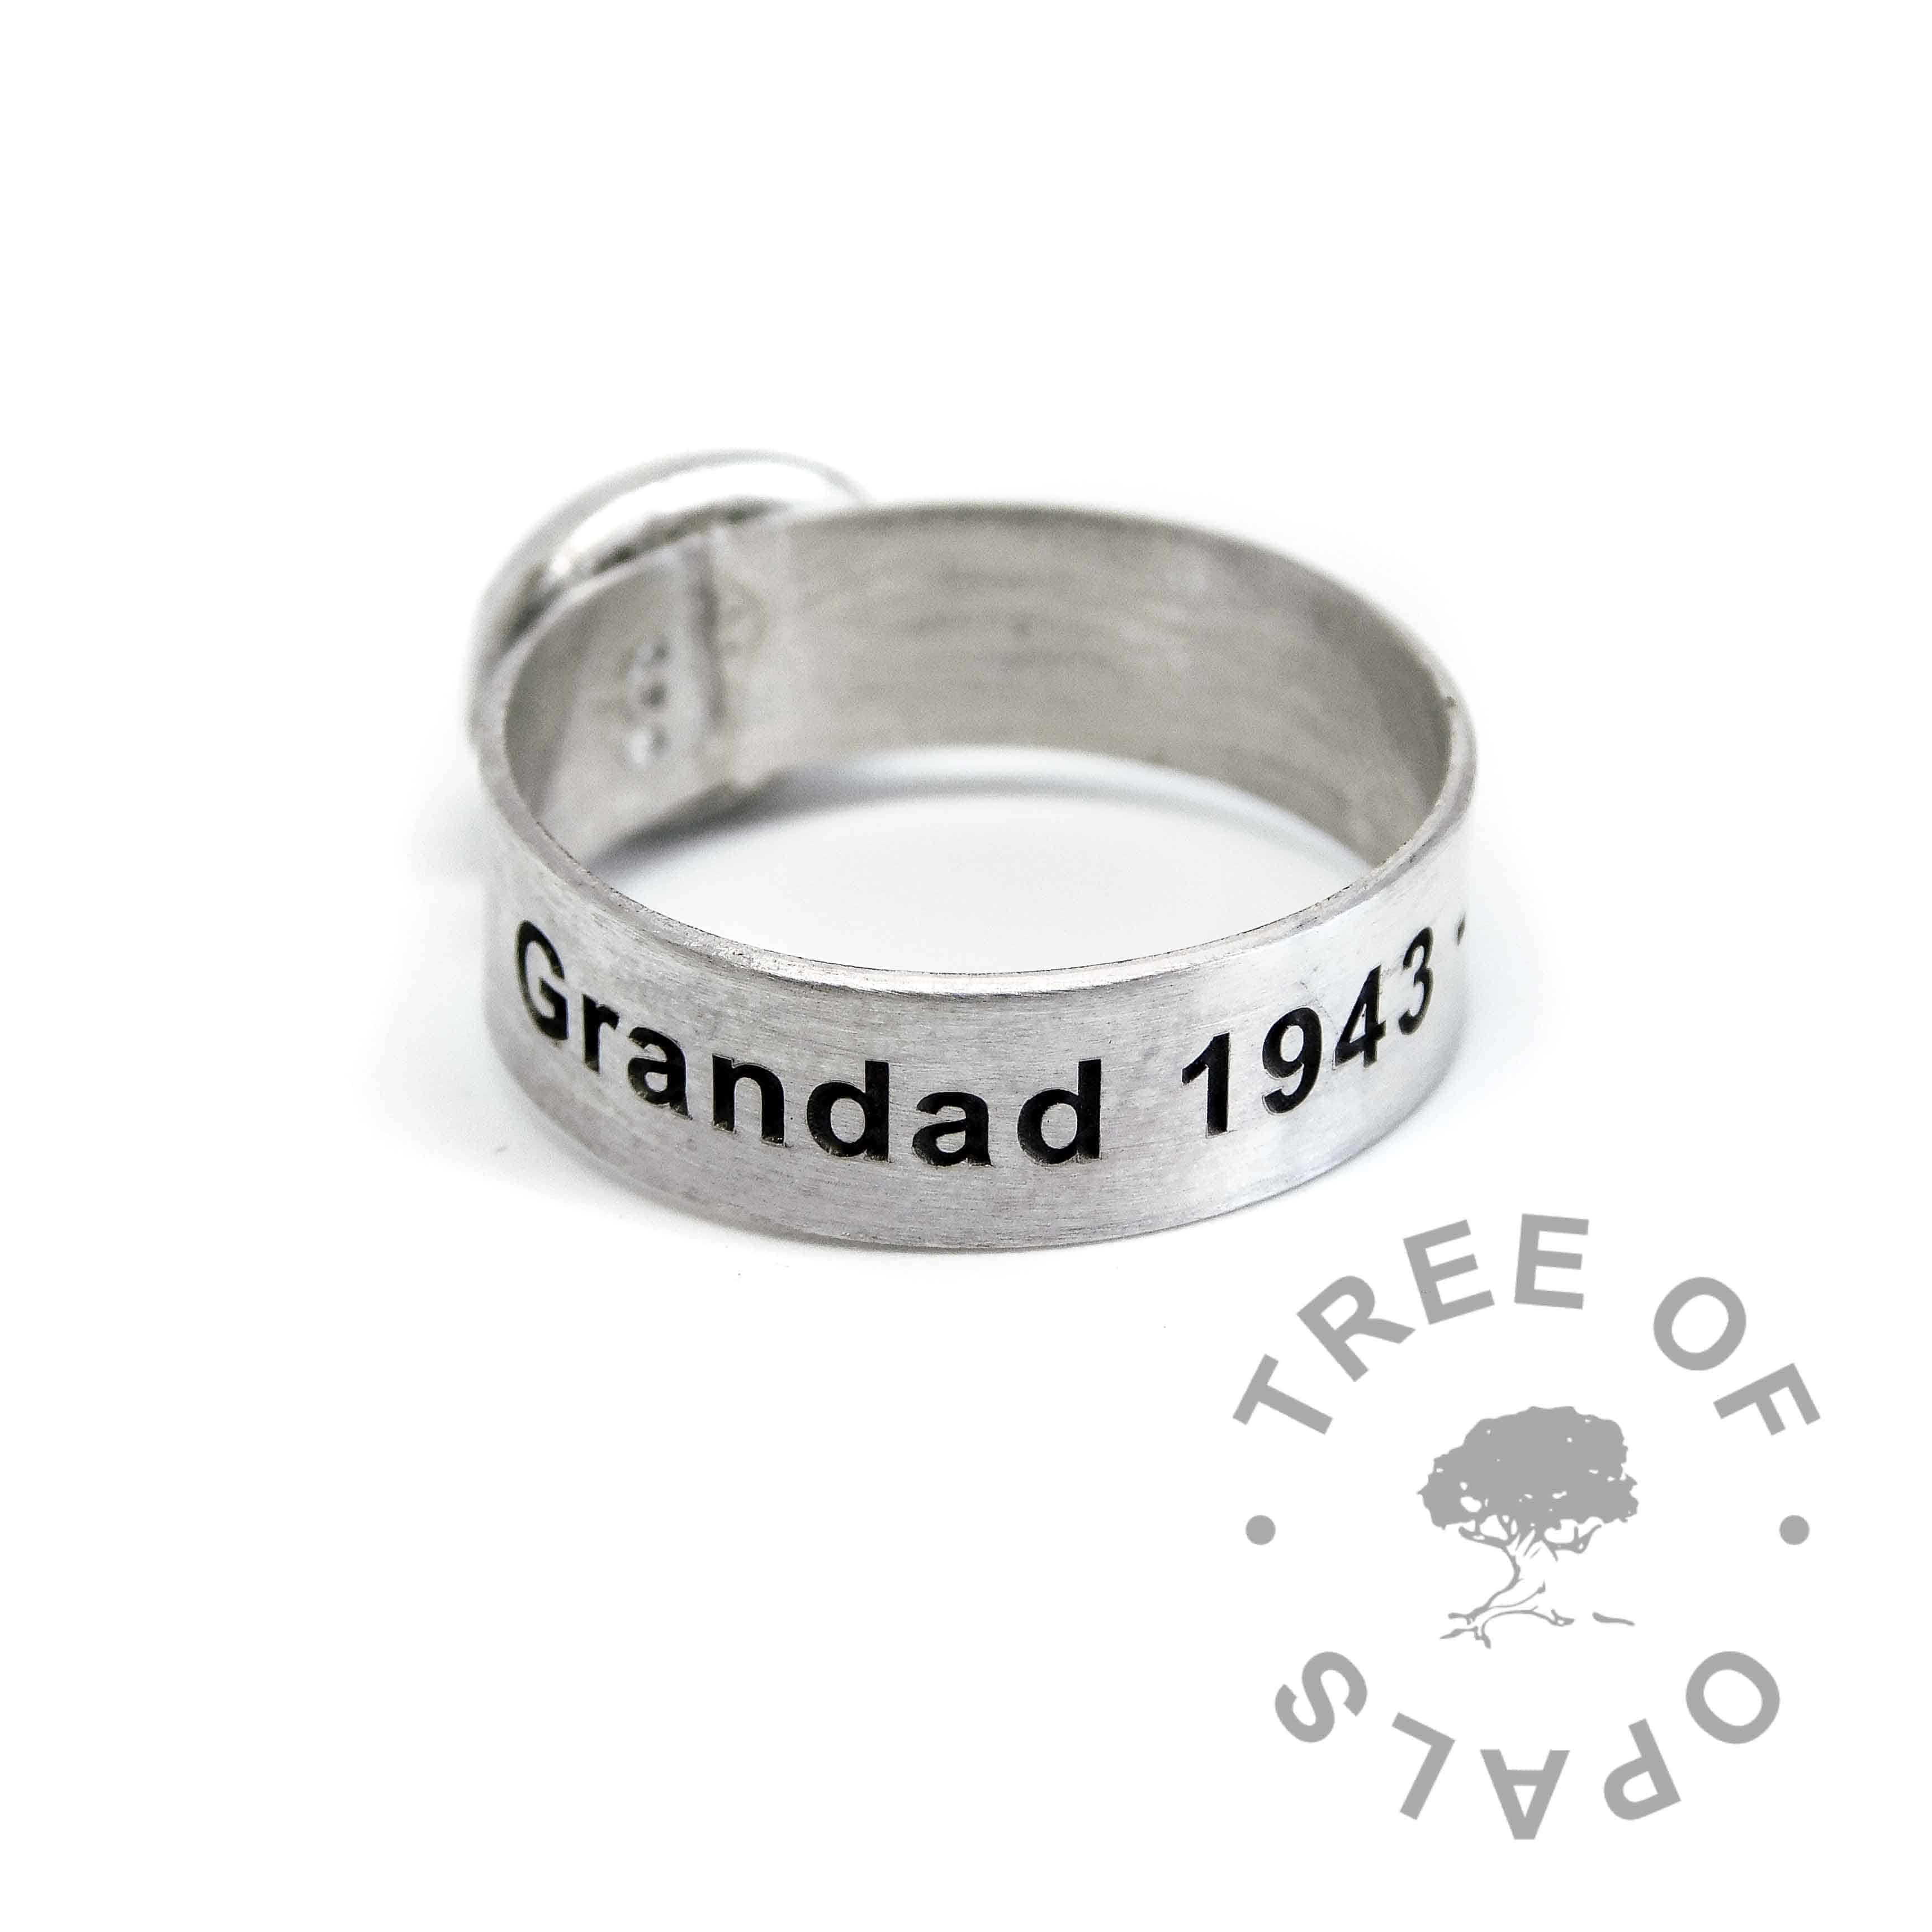 6mm brushed band ring engraved with a memorial name and dates